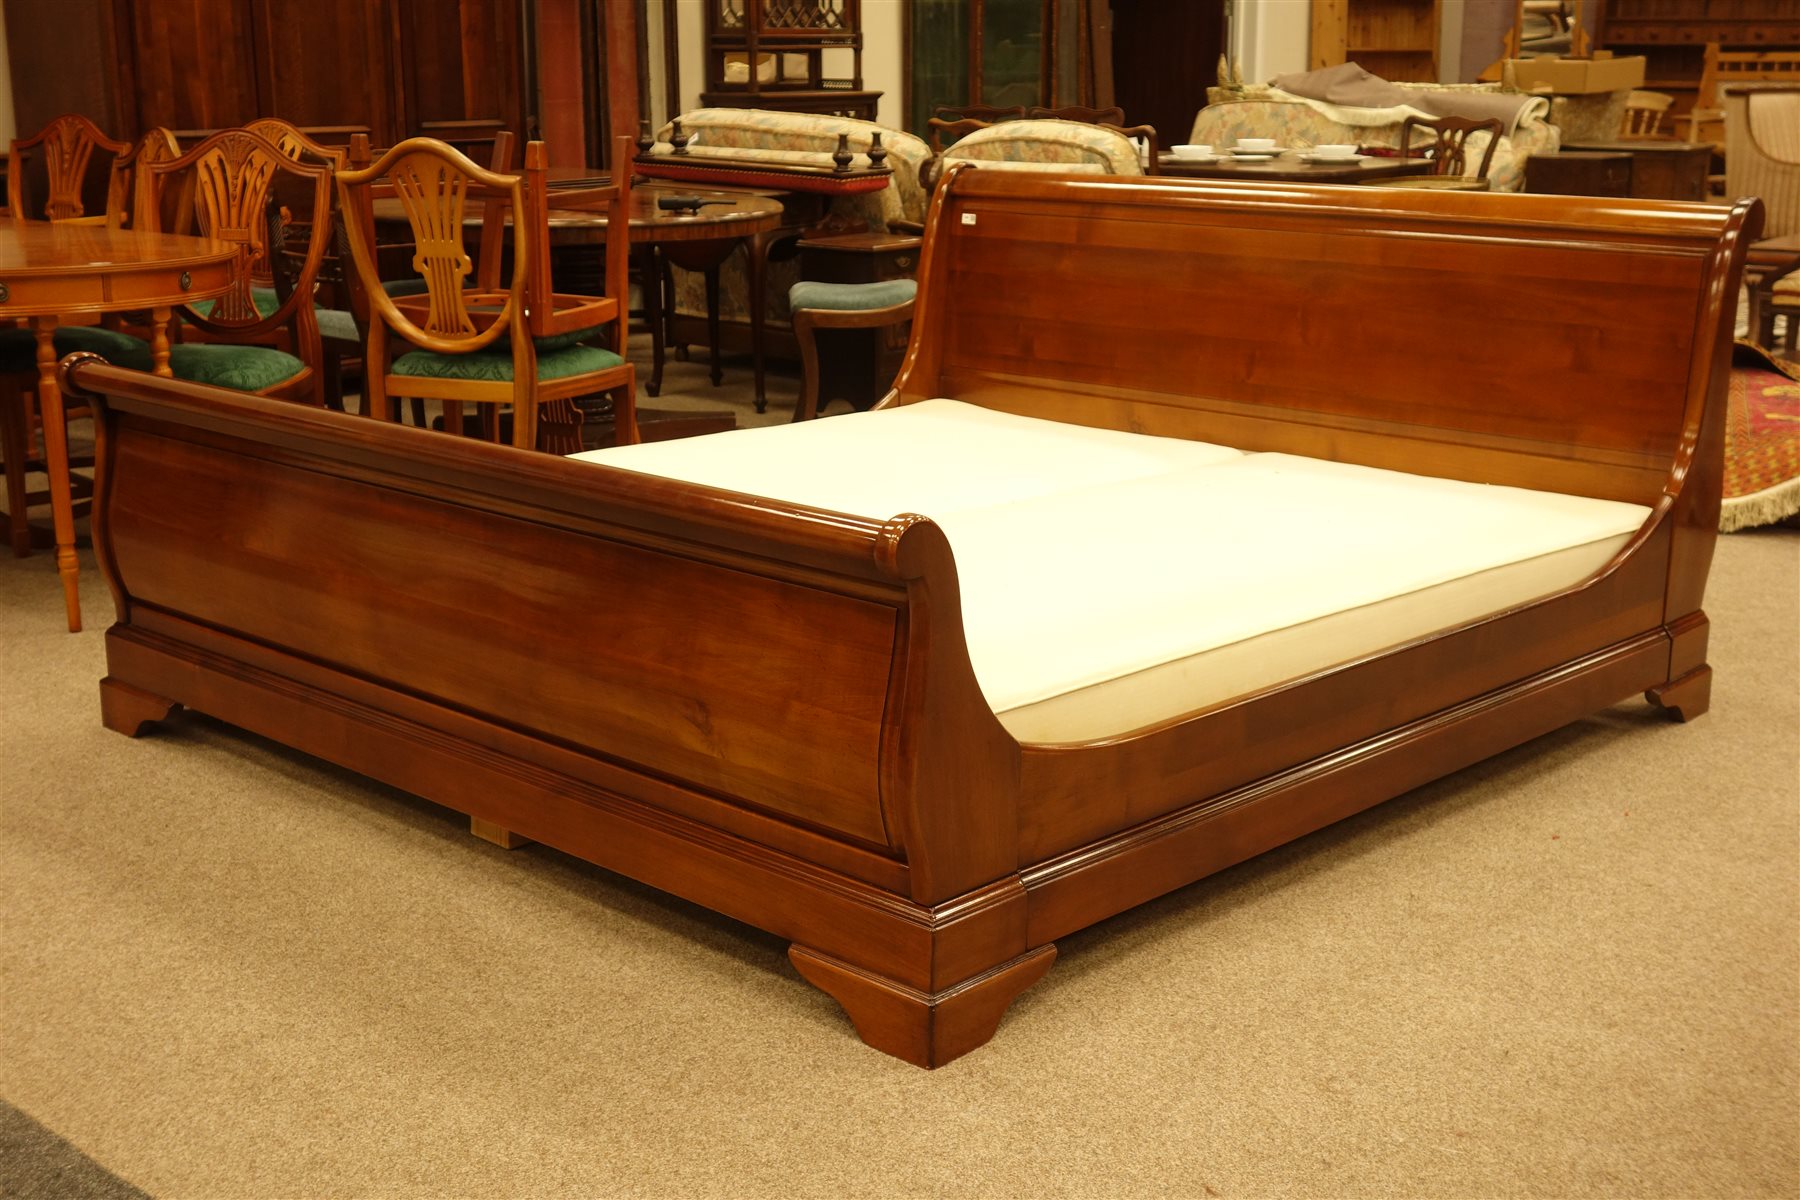 French Cherry Wood 6 Super King Size, King Sleigh Bed Frame Cherry